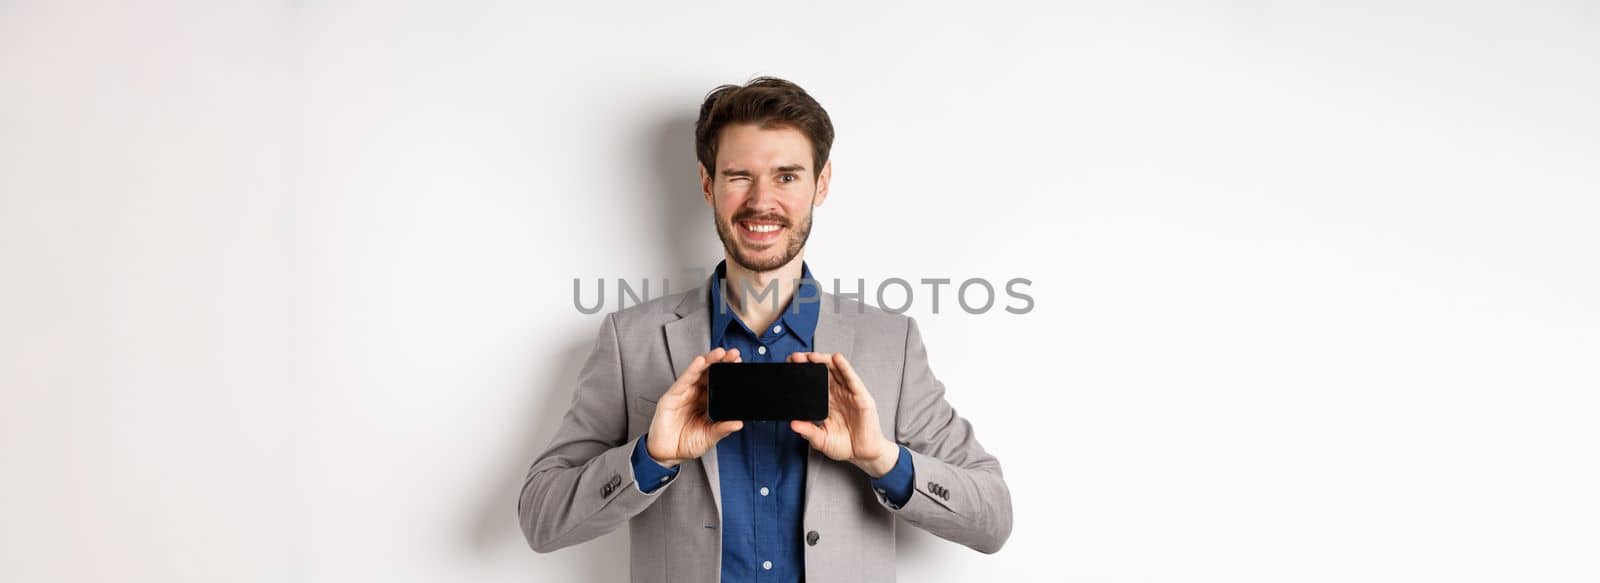 E-commerce and online shopping concept. Cheeky male model in suit winking and showing empty smartphone screen, smiling happy at camera, white background.